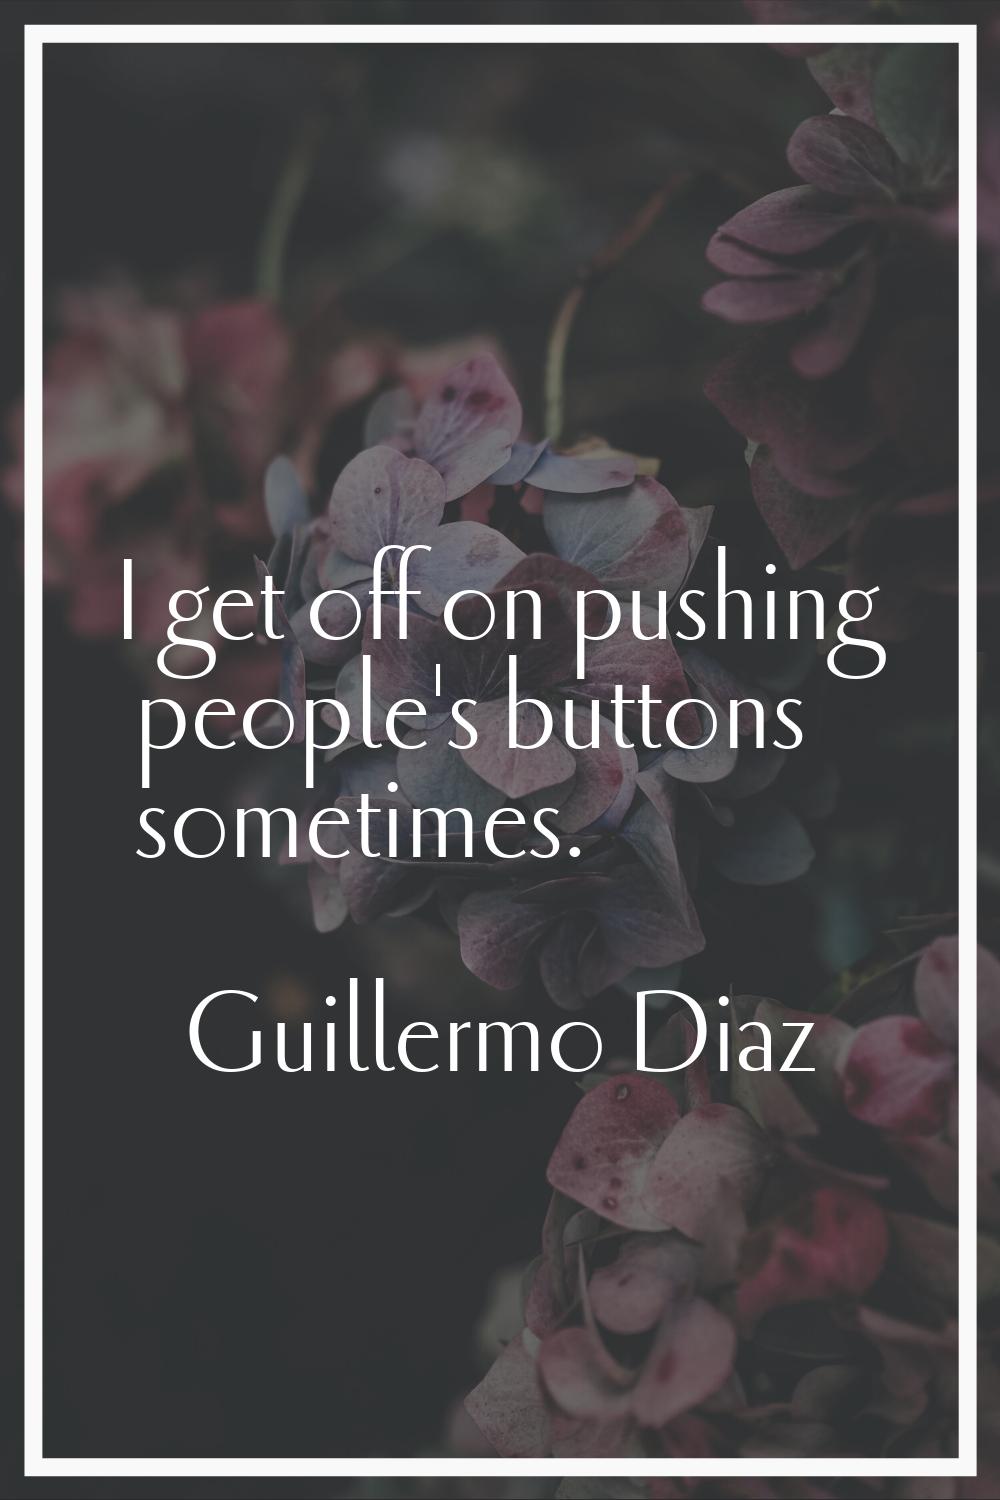 I get off on pushing people's buttons sometimes.